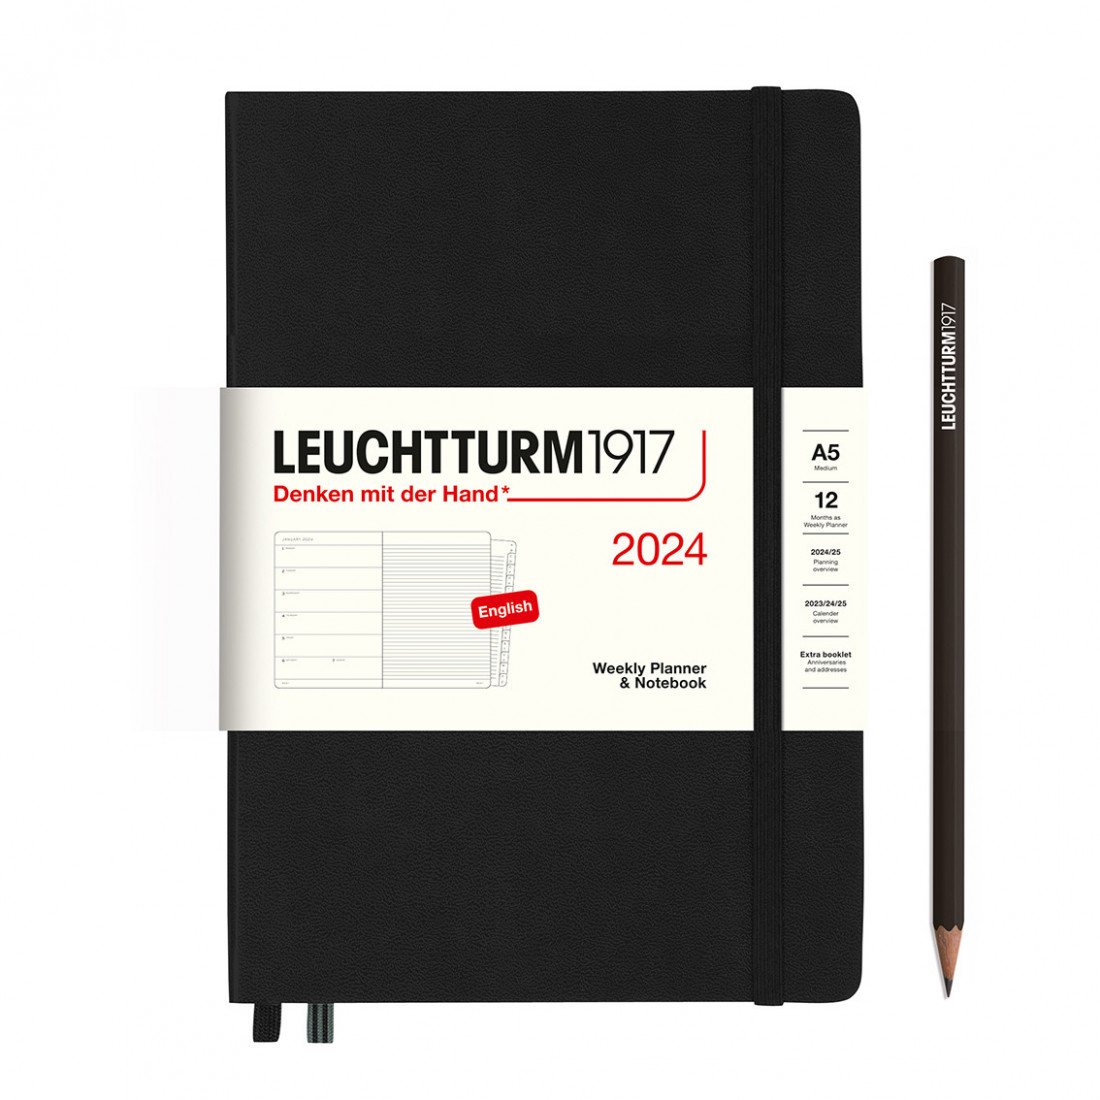 Leuchtturm 1917 Weekly Planner and Notebook 2024 Black Medium A5 Hard Cover